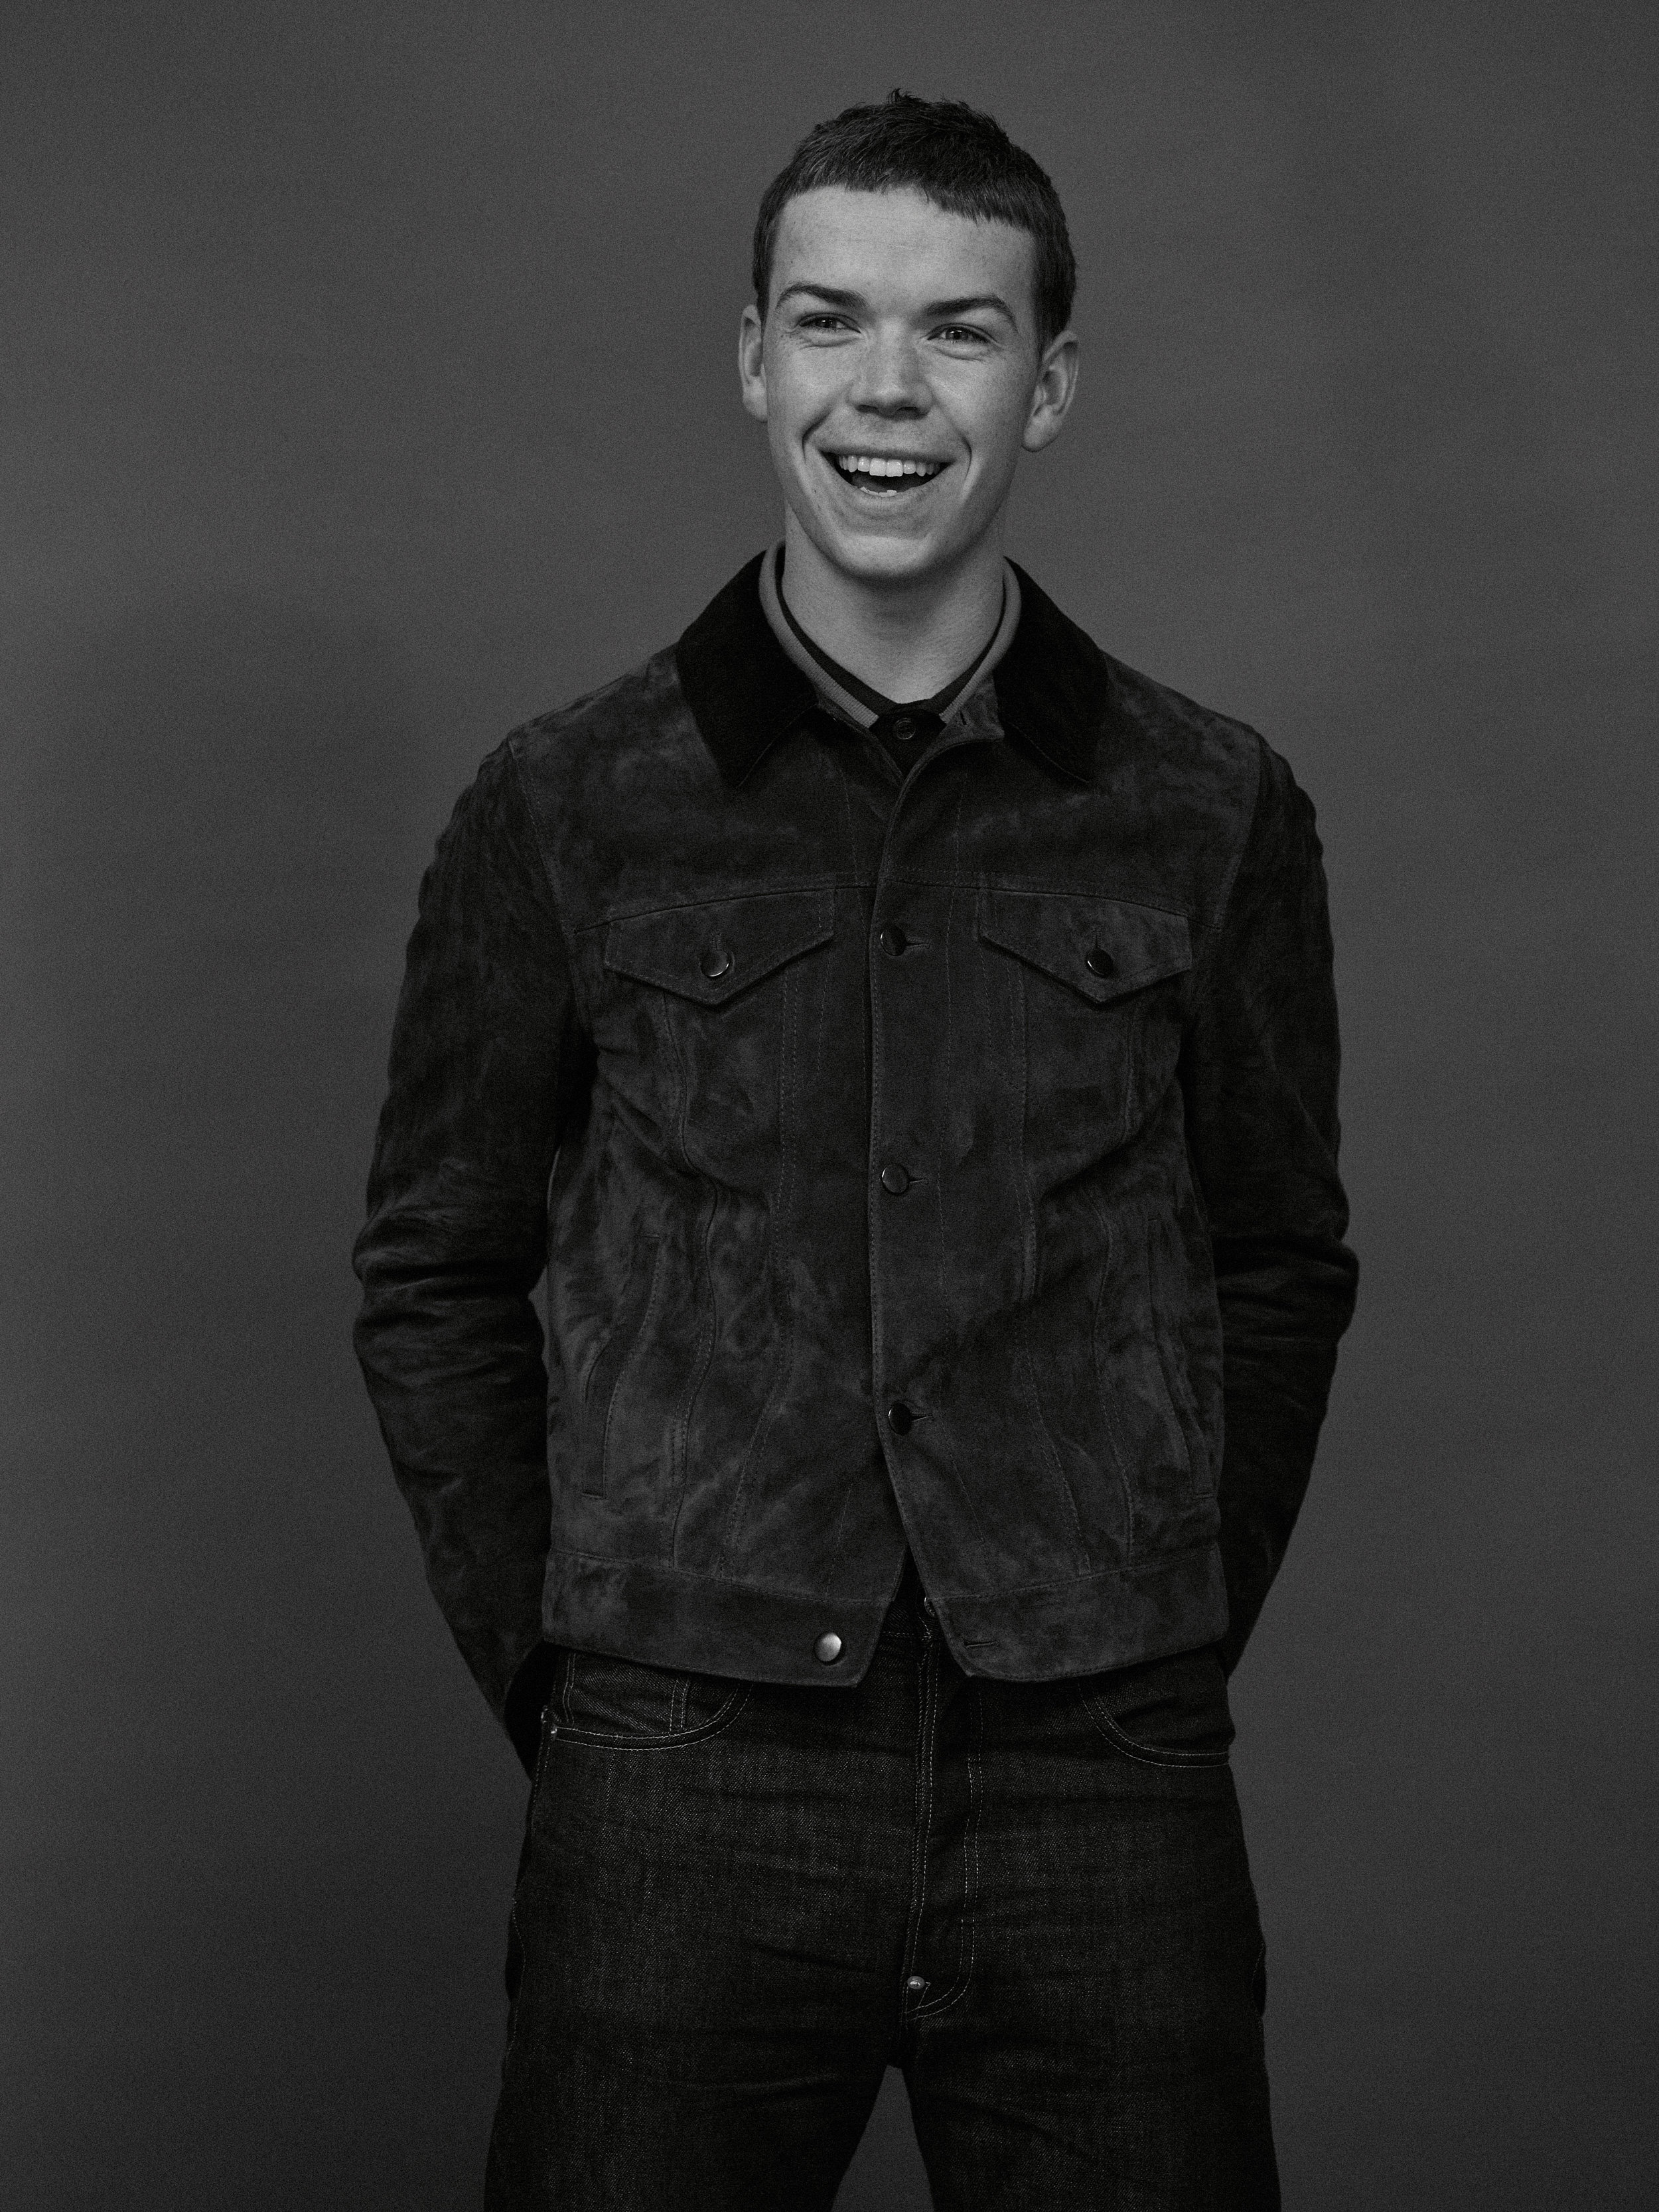 Will Poulter | All Images by Jason Hetherington | Credits: BERLUTI jacket, GUCCI shirt available at Matchesfashion.com, and LEVIS VINTAGE CLOTHING jeans